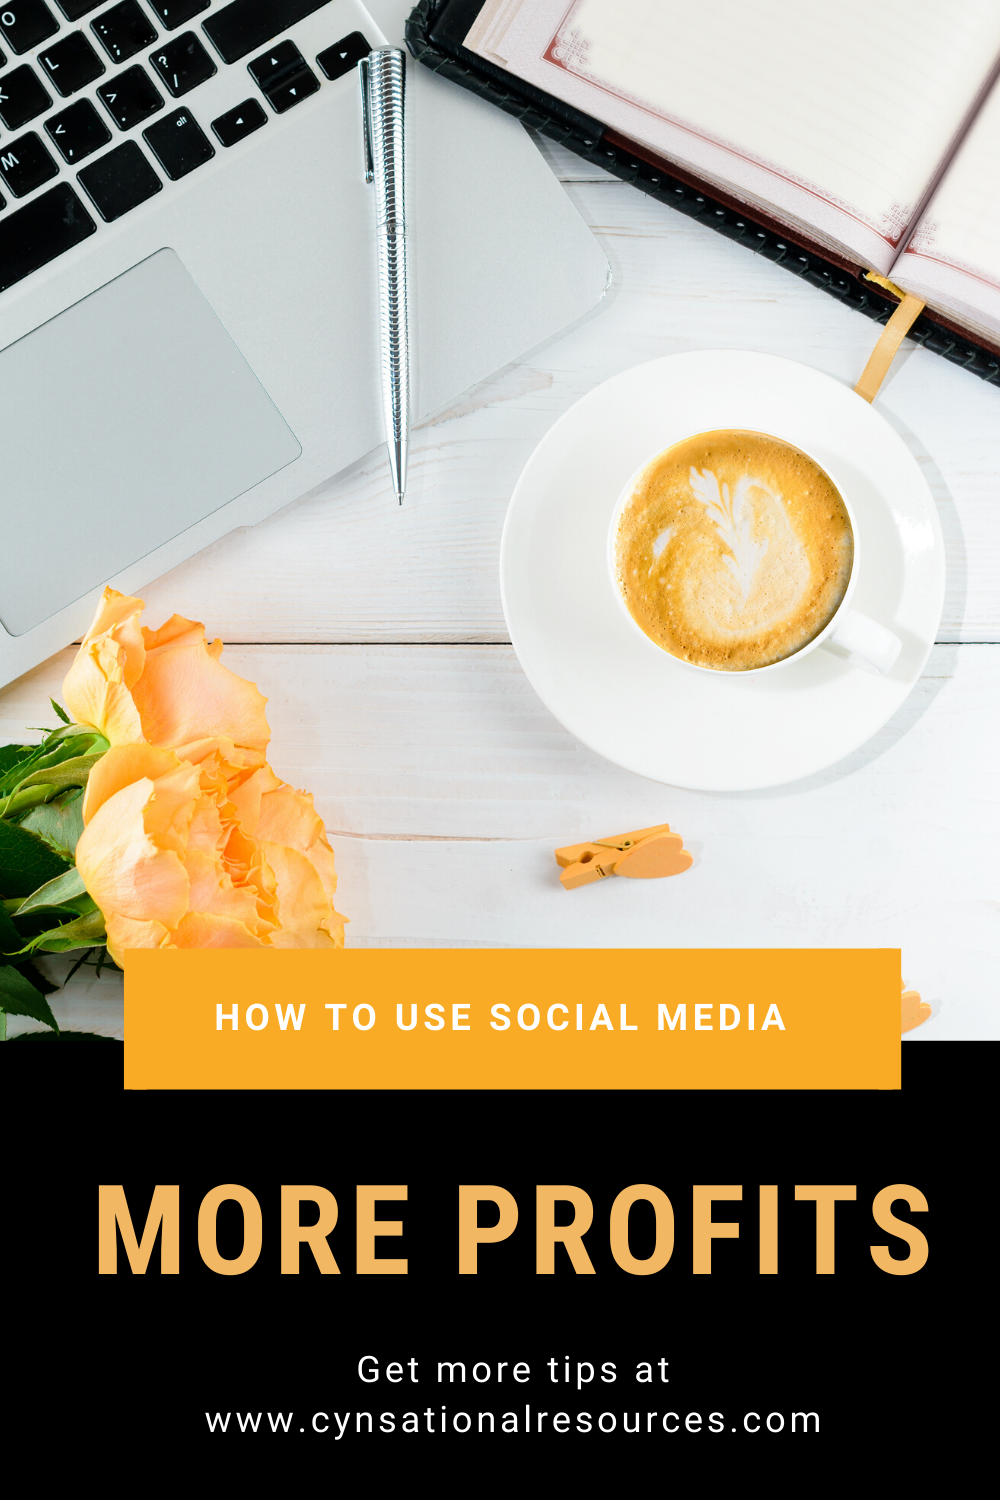 How to Increase Profit from Social Media